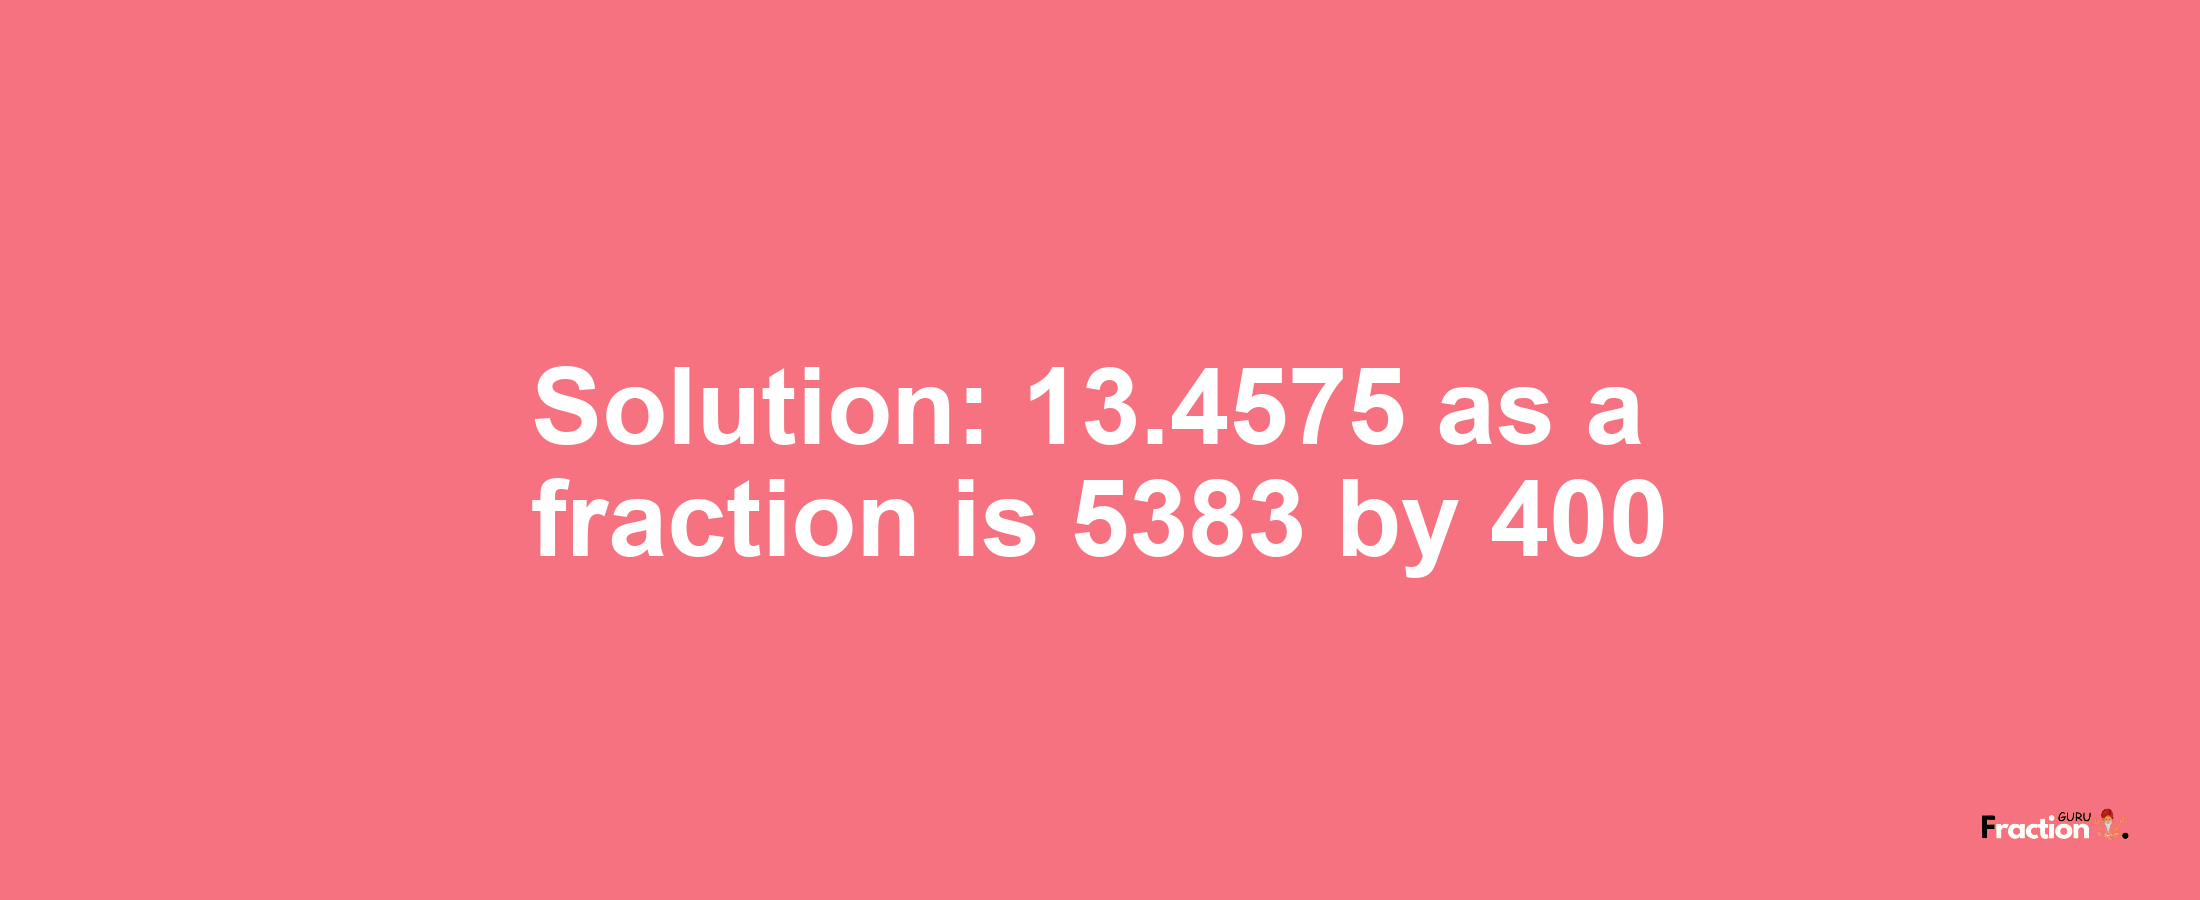 Solution:13.4575 as a fraction is 5383/400